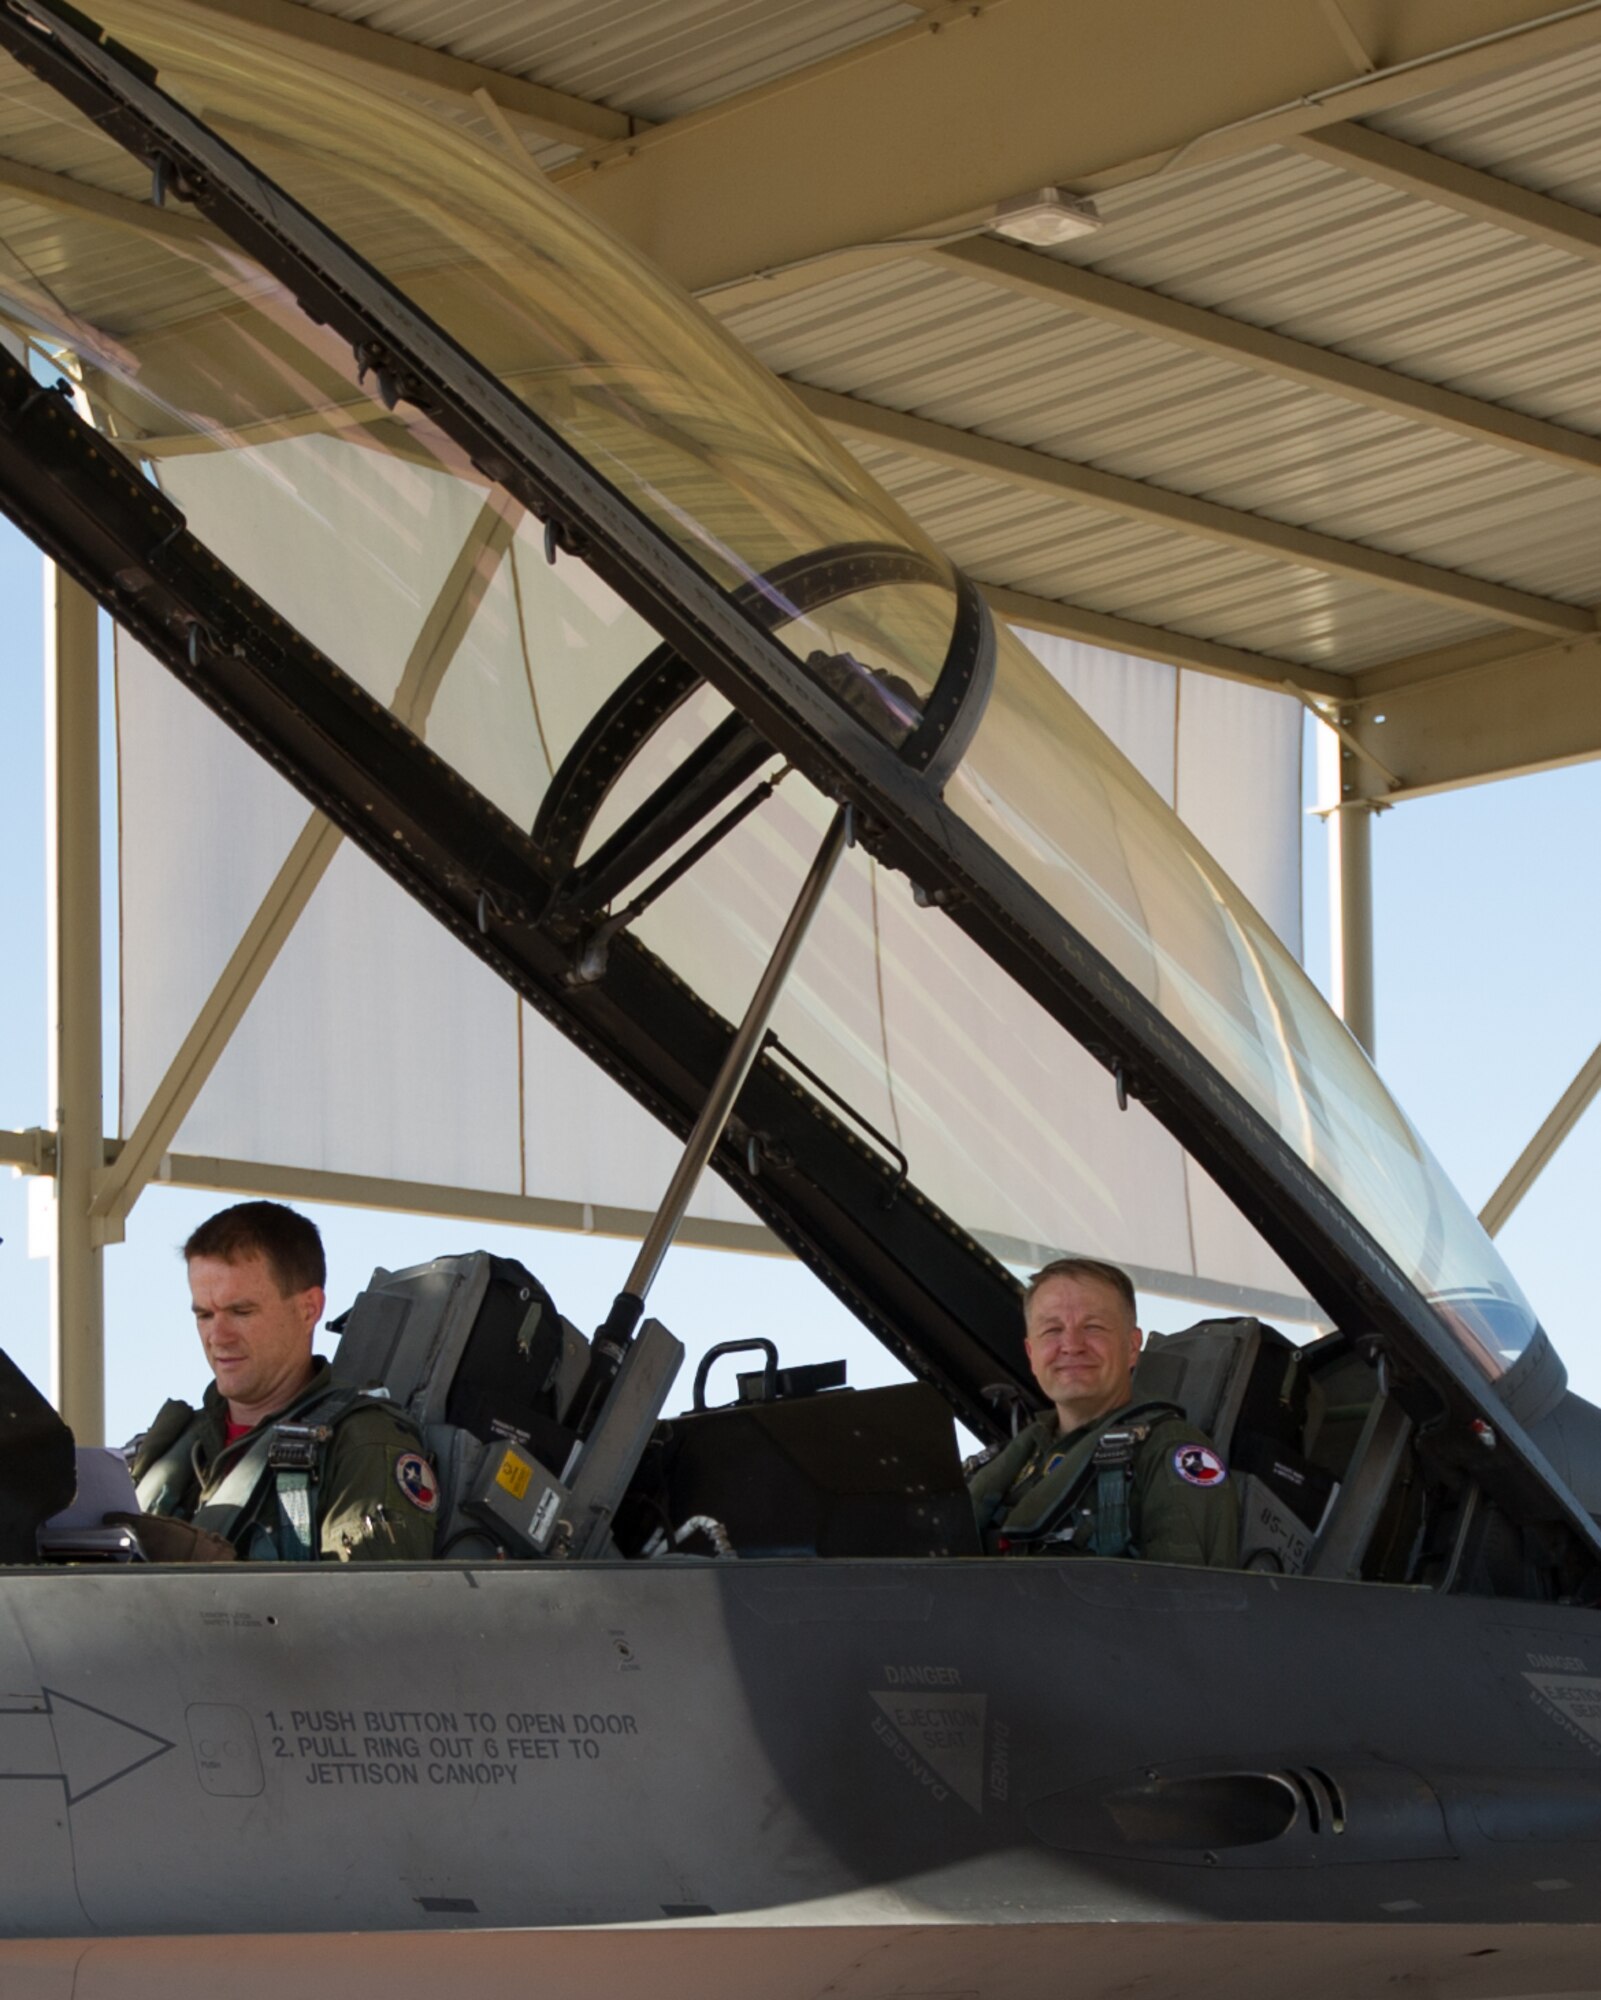 Lt. Col. Kenneth Seiver, a 457th Fighter Squadron F-16 pilot, completes a familiarization flight for Chief Master Sgt. James Loper, 10th Air Force command chief, at Naval Air Station Fort Worth Joint Reserve Base, Texas on July 12, 2019. The flight gave Loper a hands-on understanding of the jet's capabilities and the squadron’s mission. (U.S. Air Force photo by Senior Airman Randall Moose)